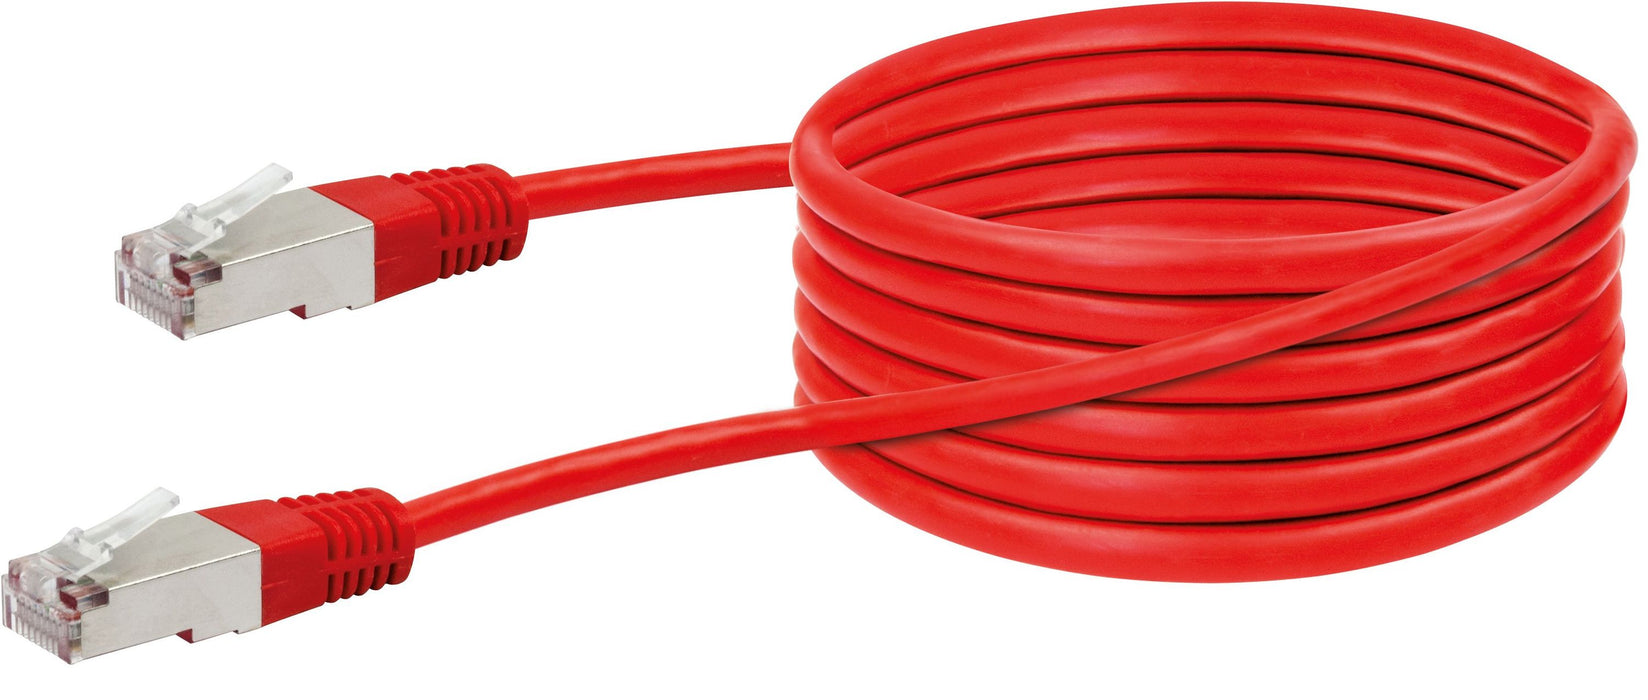 CAT 5e network cable (STP, crossover)